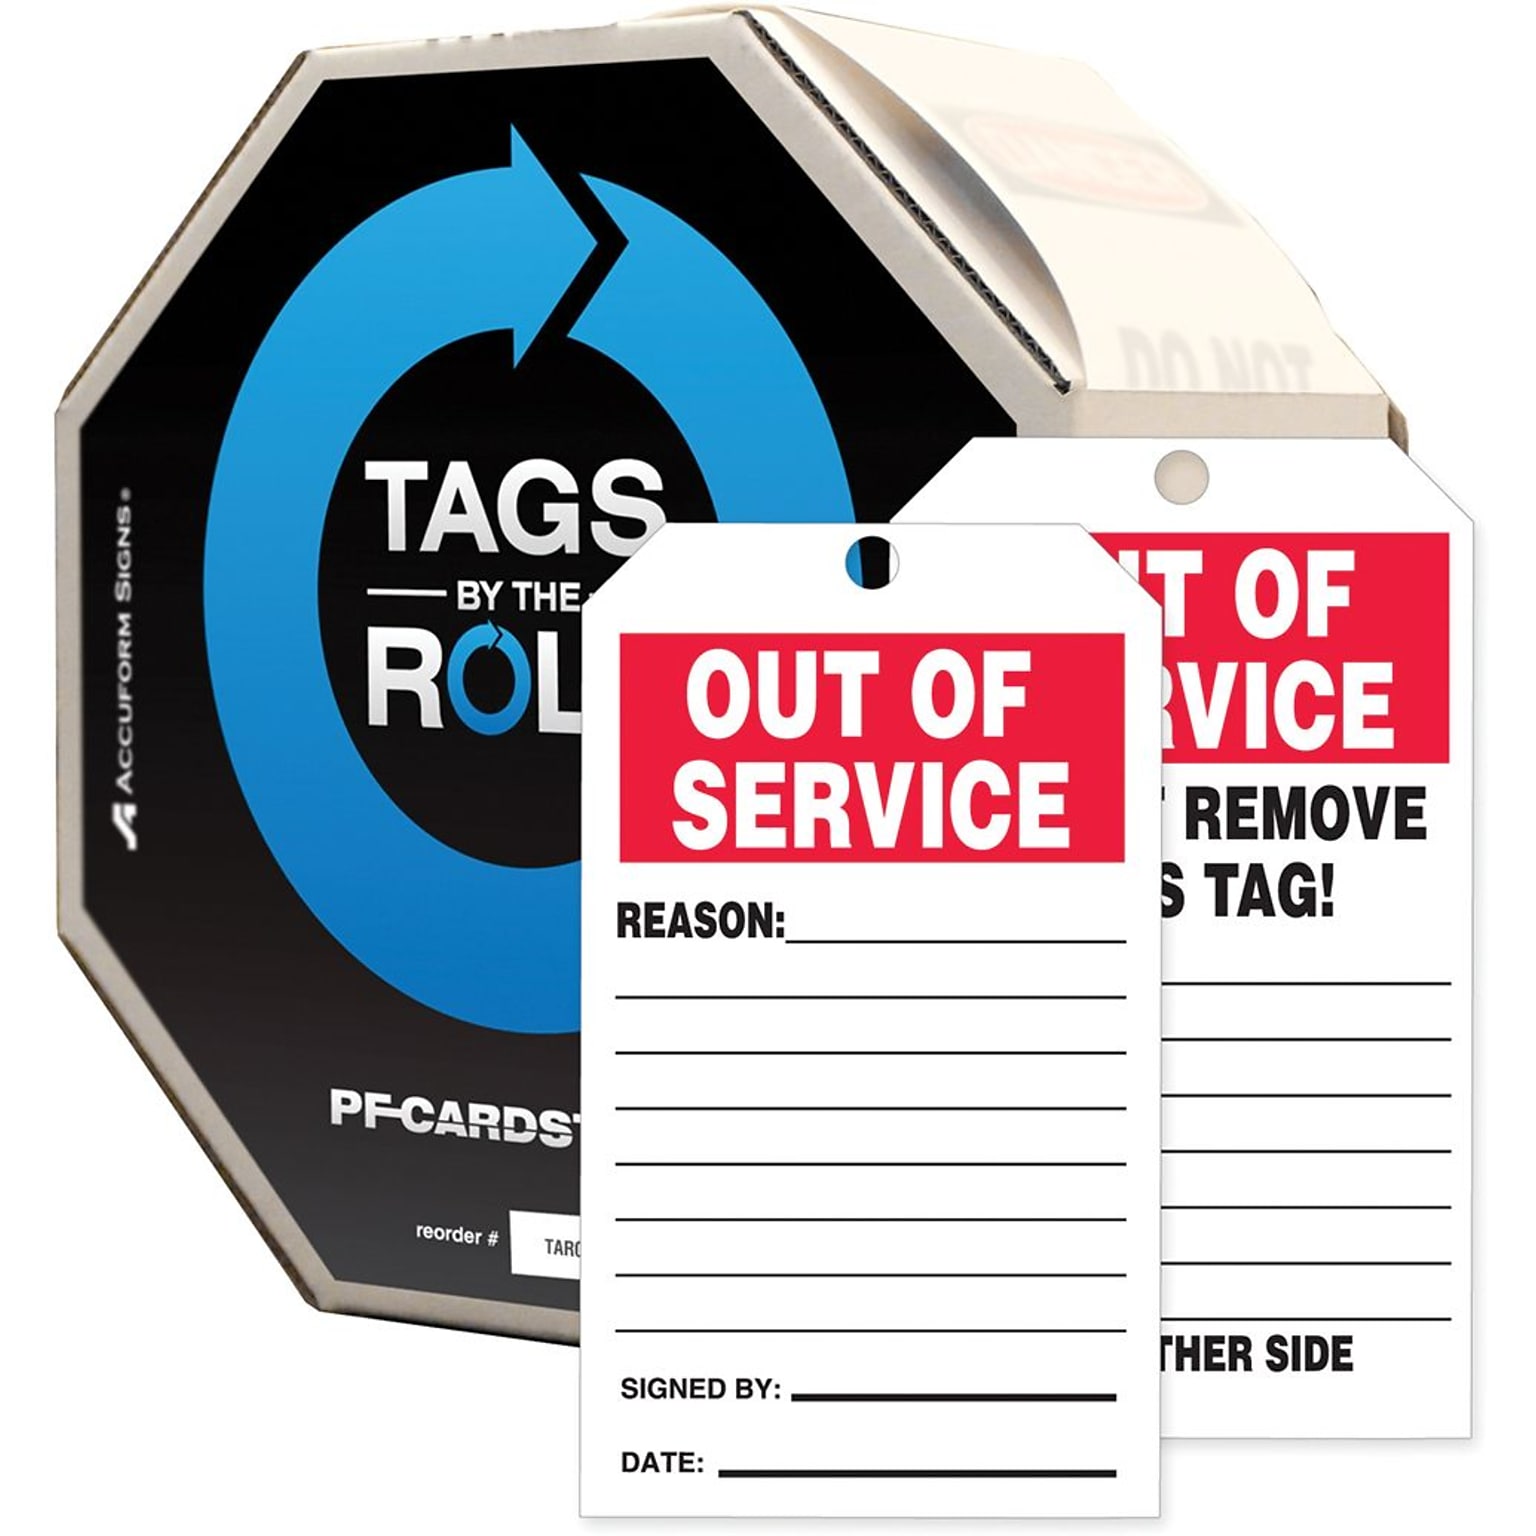 Accuform 6 1/4 x 3 PF-Cardstock Tags By-The-Roll OUT.., Red/Black On White, 100/Roll (TAR714)